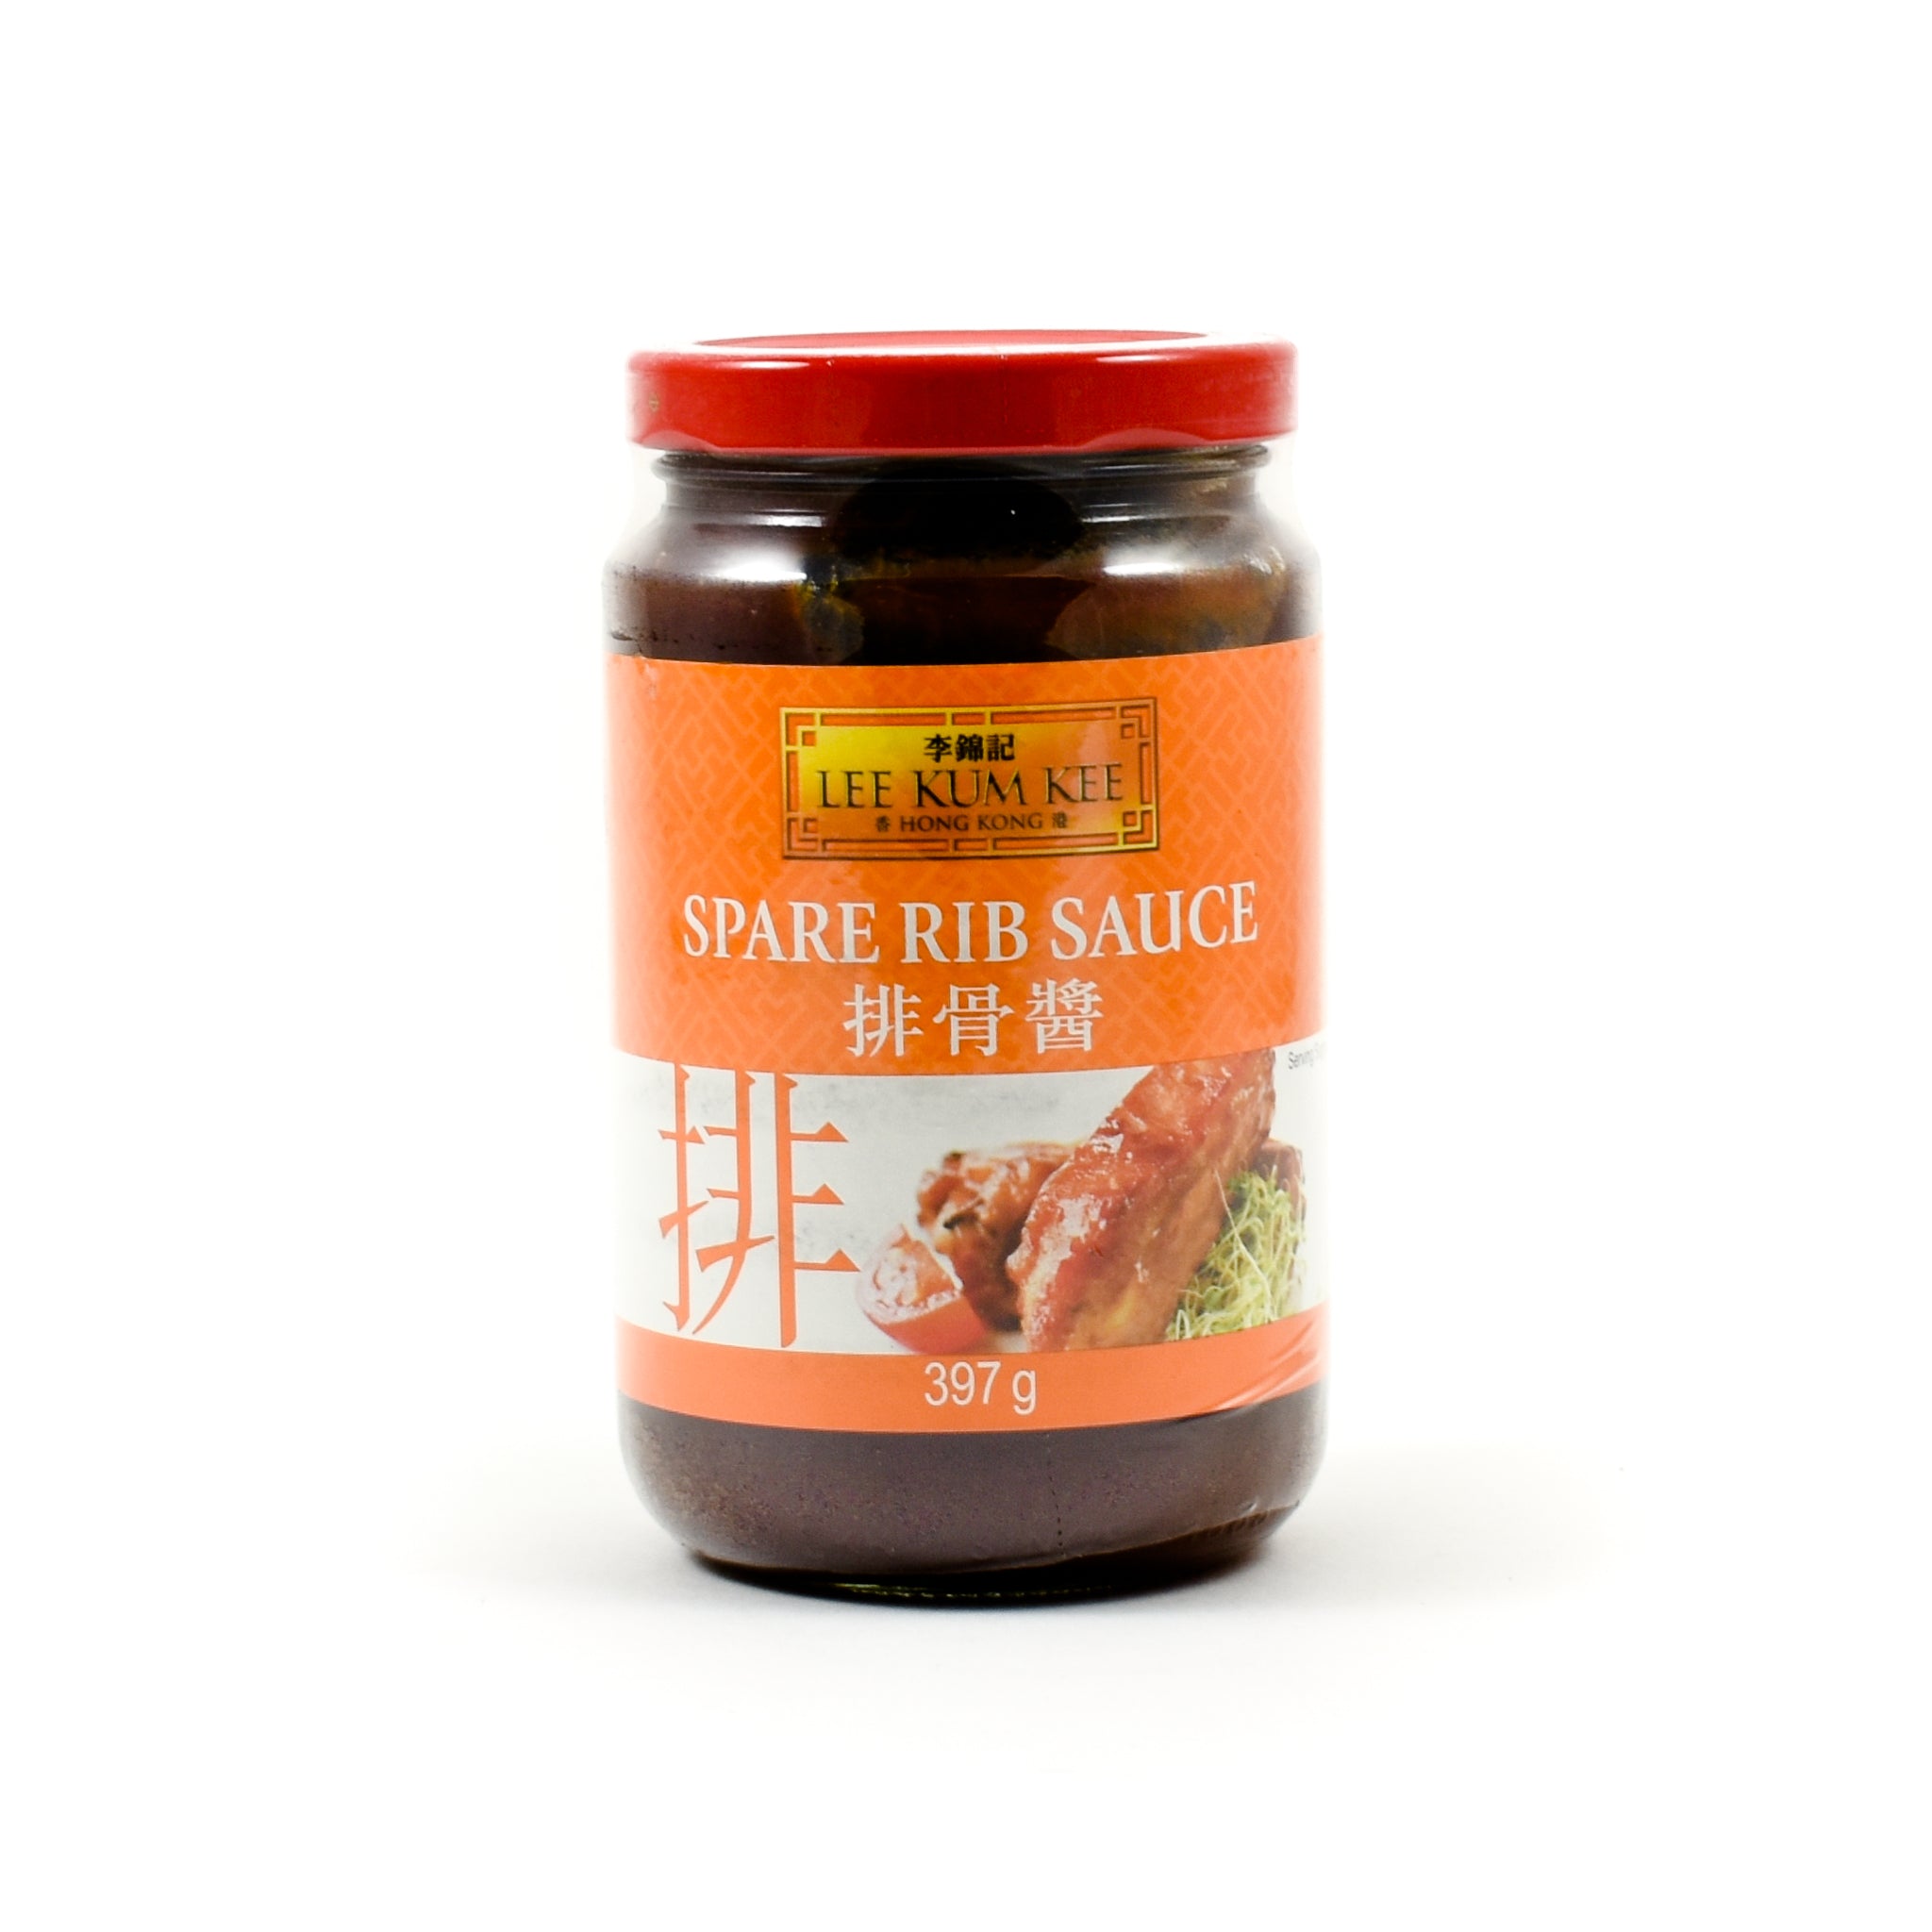 Lee Kum Kee Spare Rib Sauce 397g Ingredients Sauces & Condiments Asian Sauces & Condiments Chinese Food